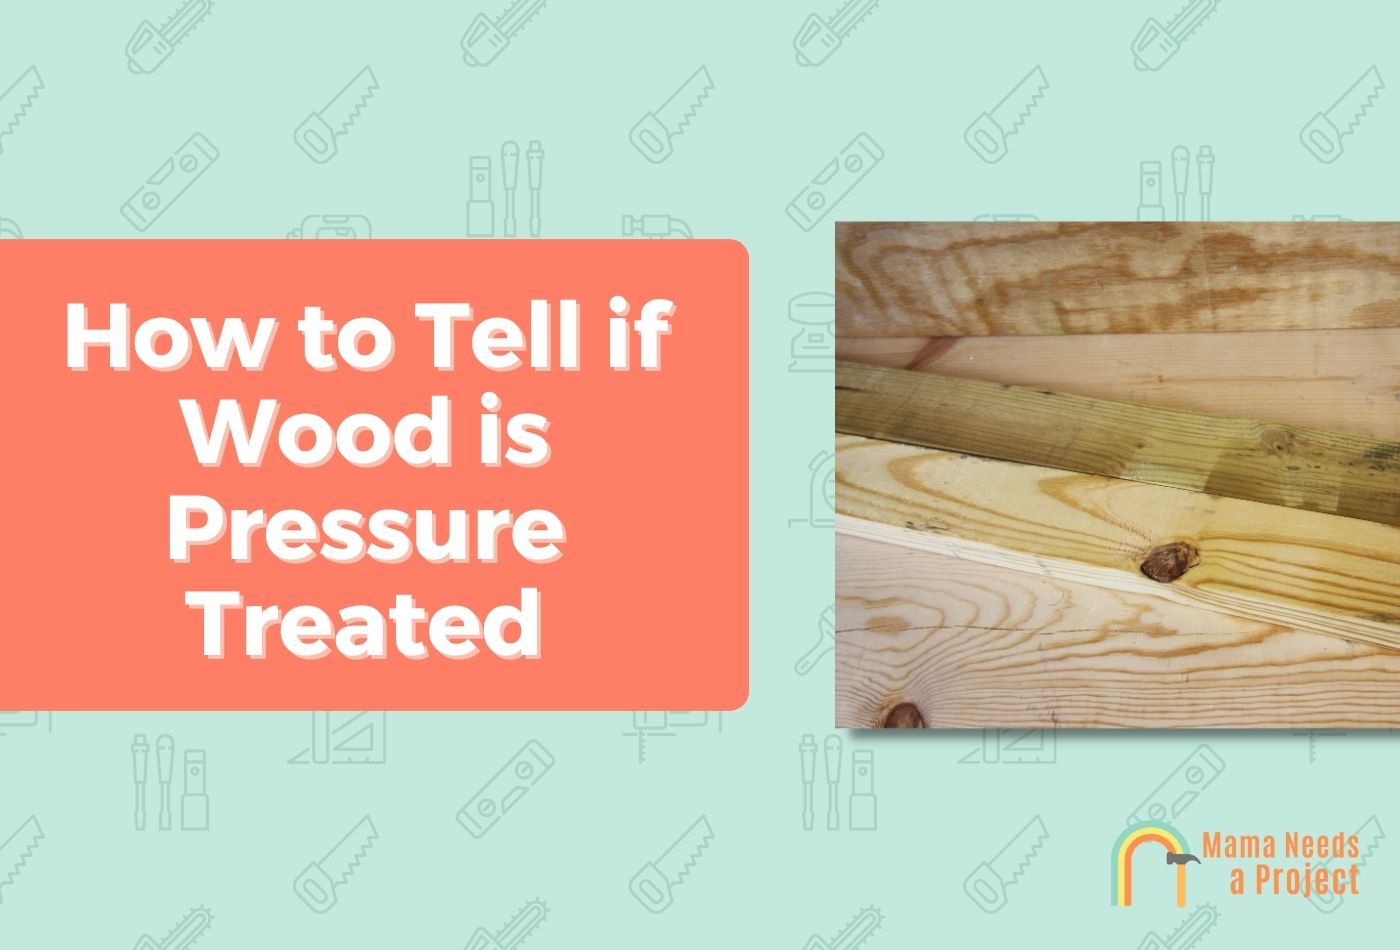 Ways to Tell if Wood is Pressure Treated